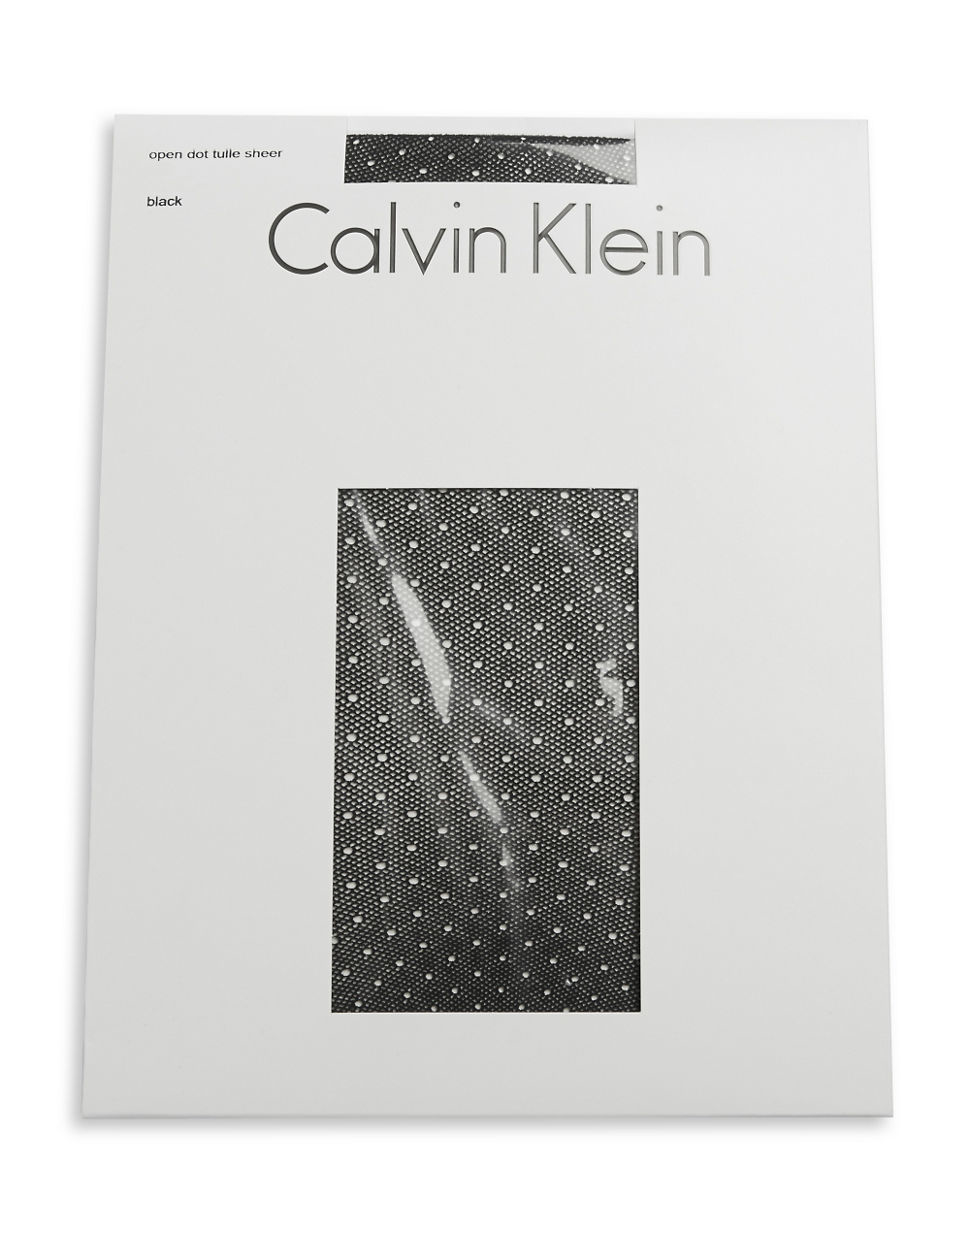 Calvin Klein Dotted Tulle Sheer Tights in Black (Green) - Lyst